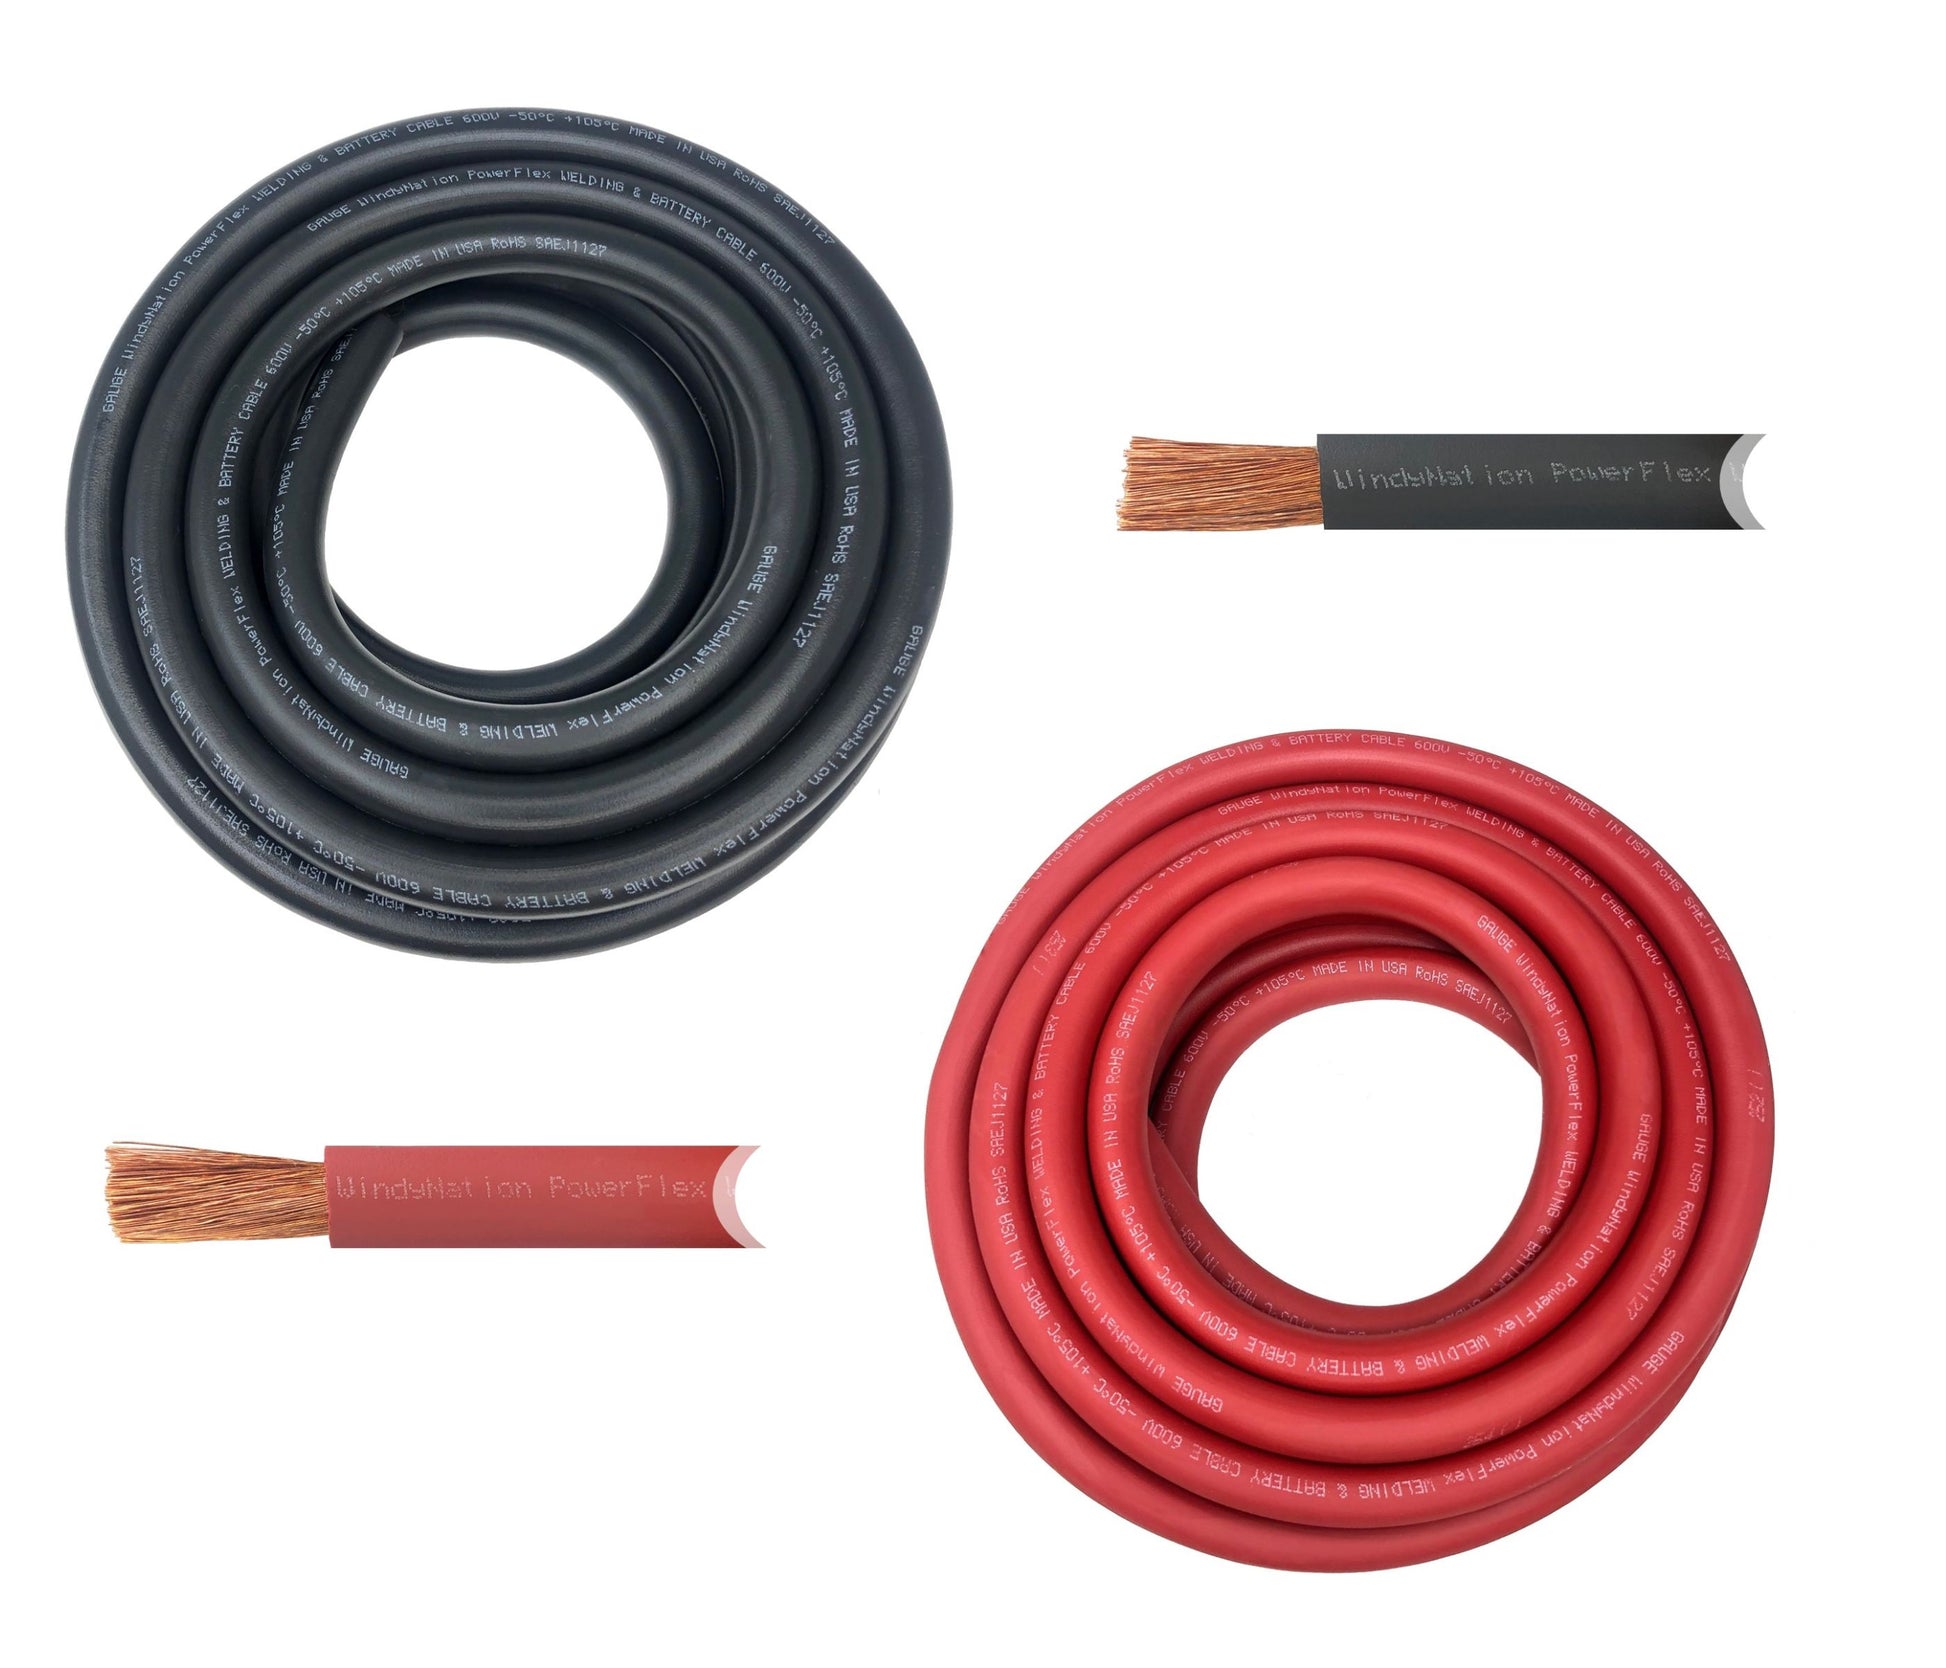 8 Gauge 8 AWG 30 Feet Black + 30 Feet Red Welding Battery Pure Copper  Flexible Cable Wire - Car, Inverter, RV, Solar